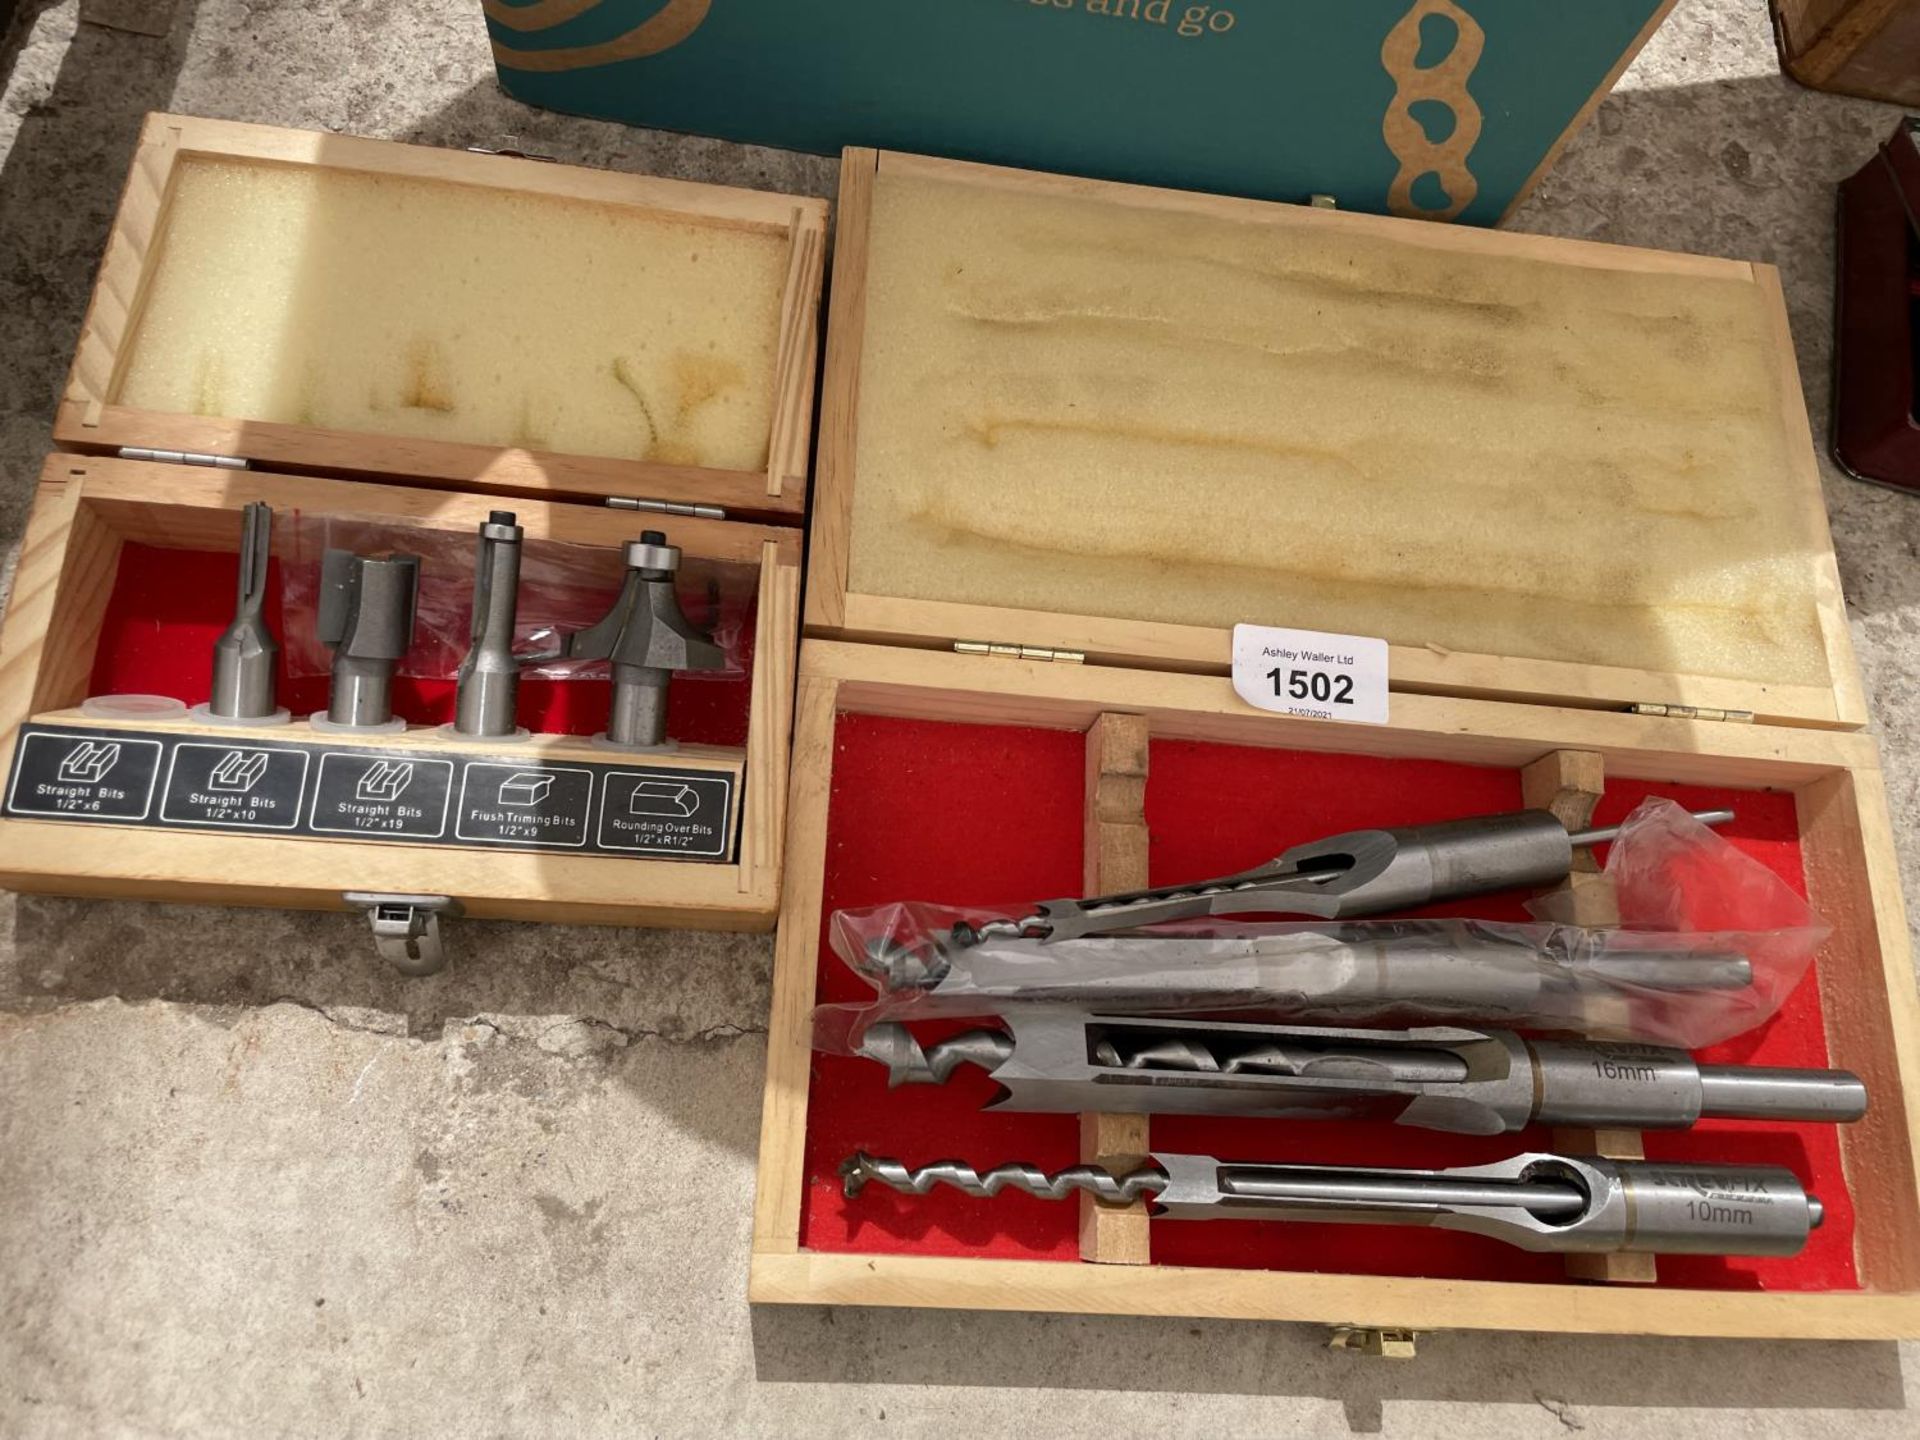 AN ASSORTMENT OF MORTISE DRILL BITS AND LATHE TOOLS - Image 6 of 8